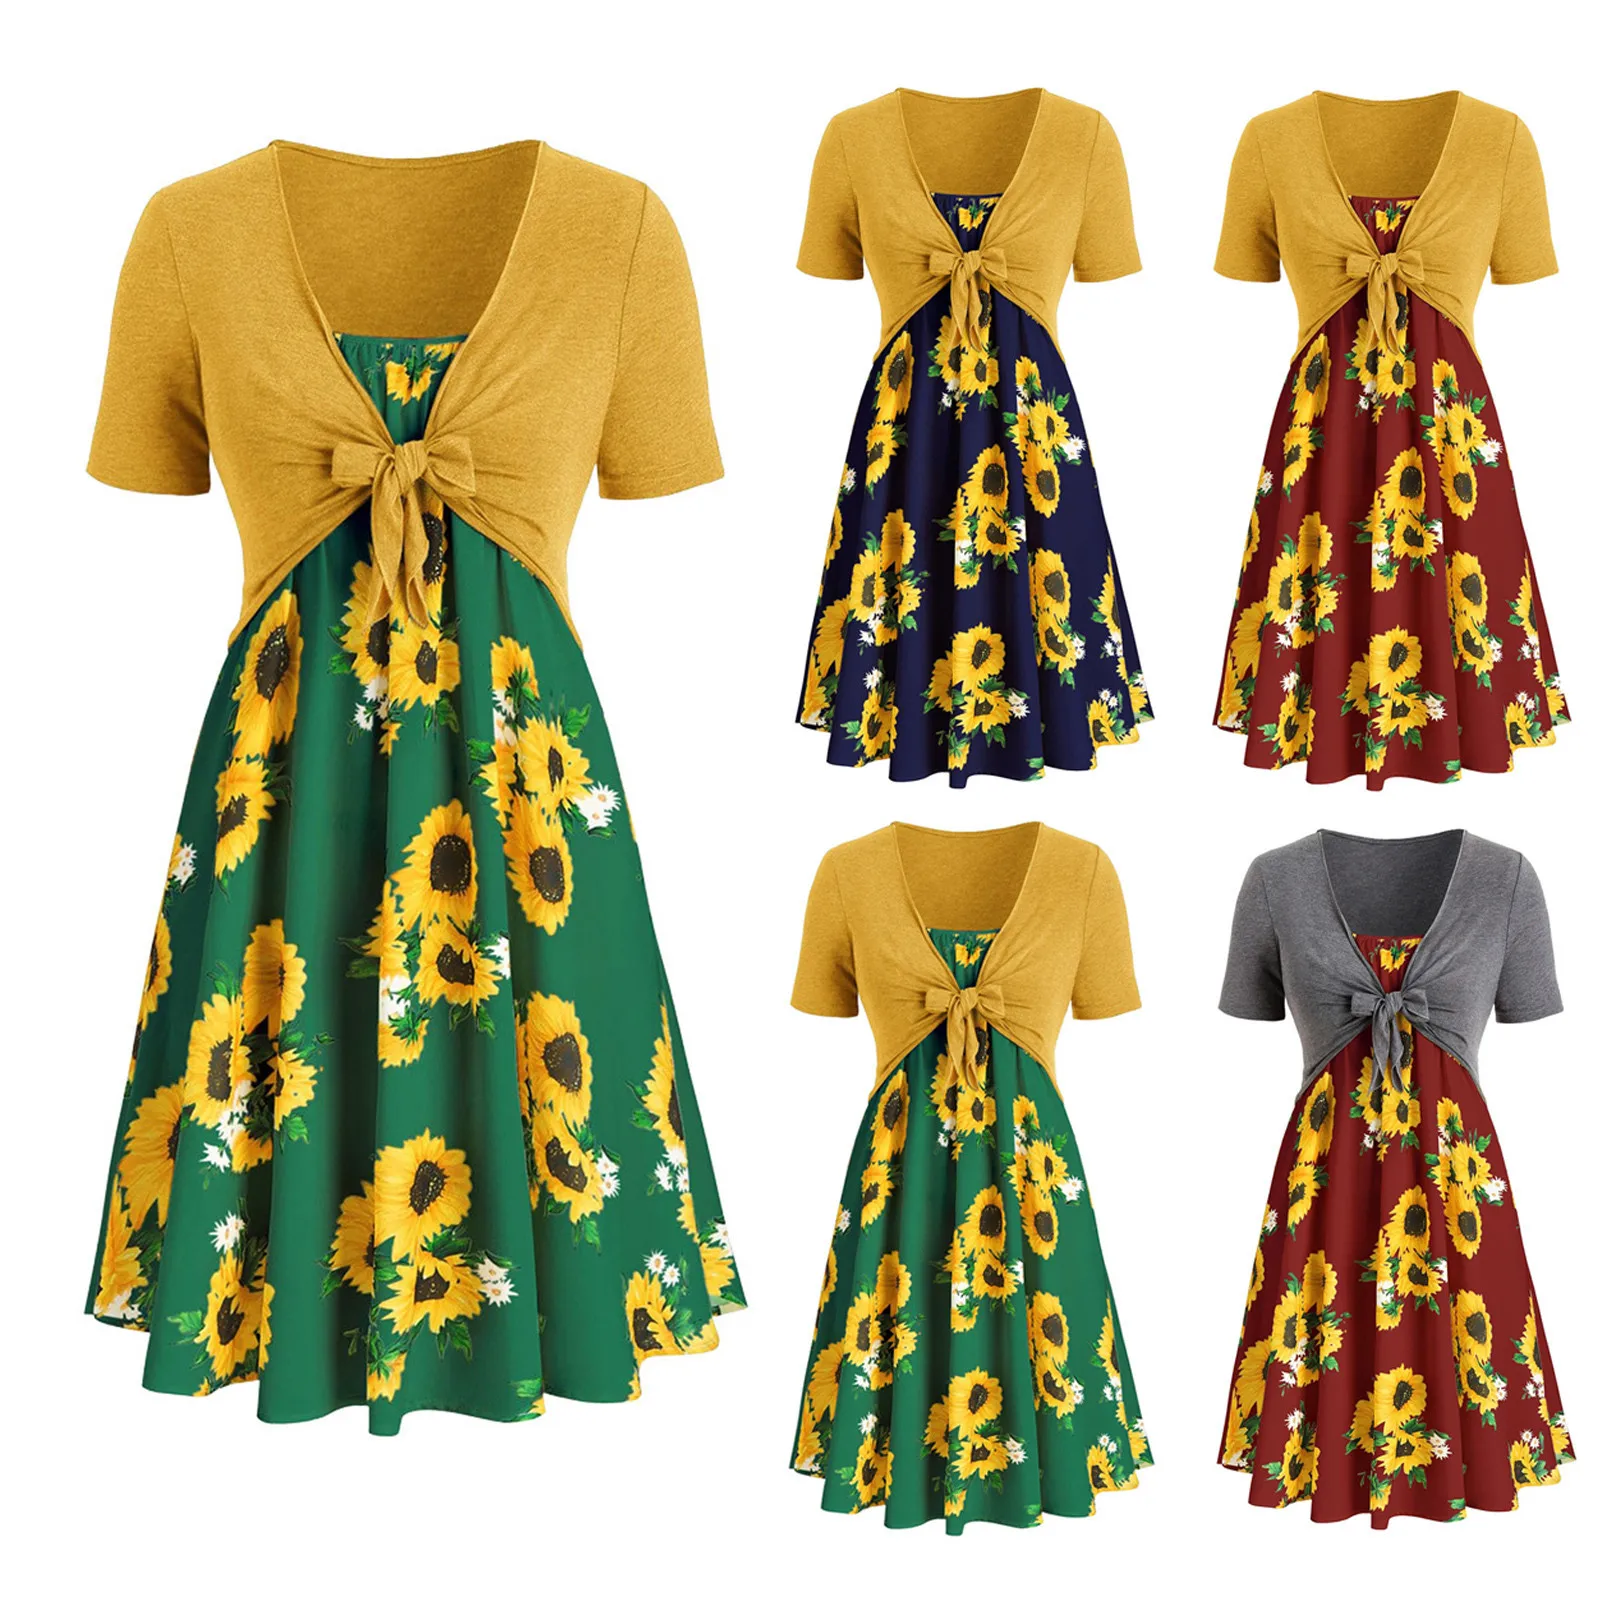 Dresses for Women Casual Summer,Short Sleeve Bow Knot Cover Up Tops Sunflower Strap Midi Dress Pleated Sun Dresses 